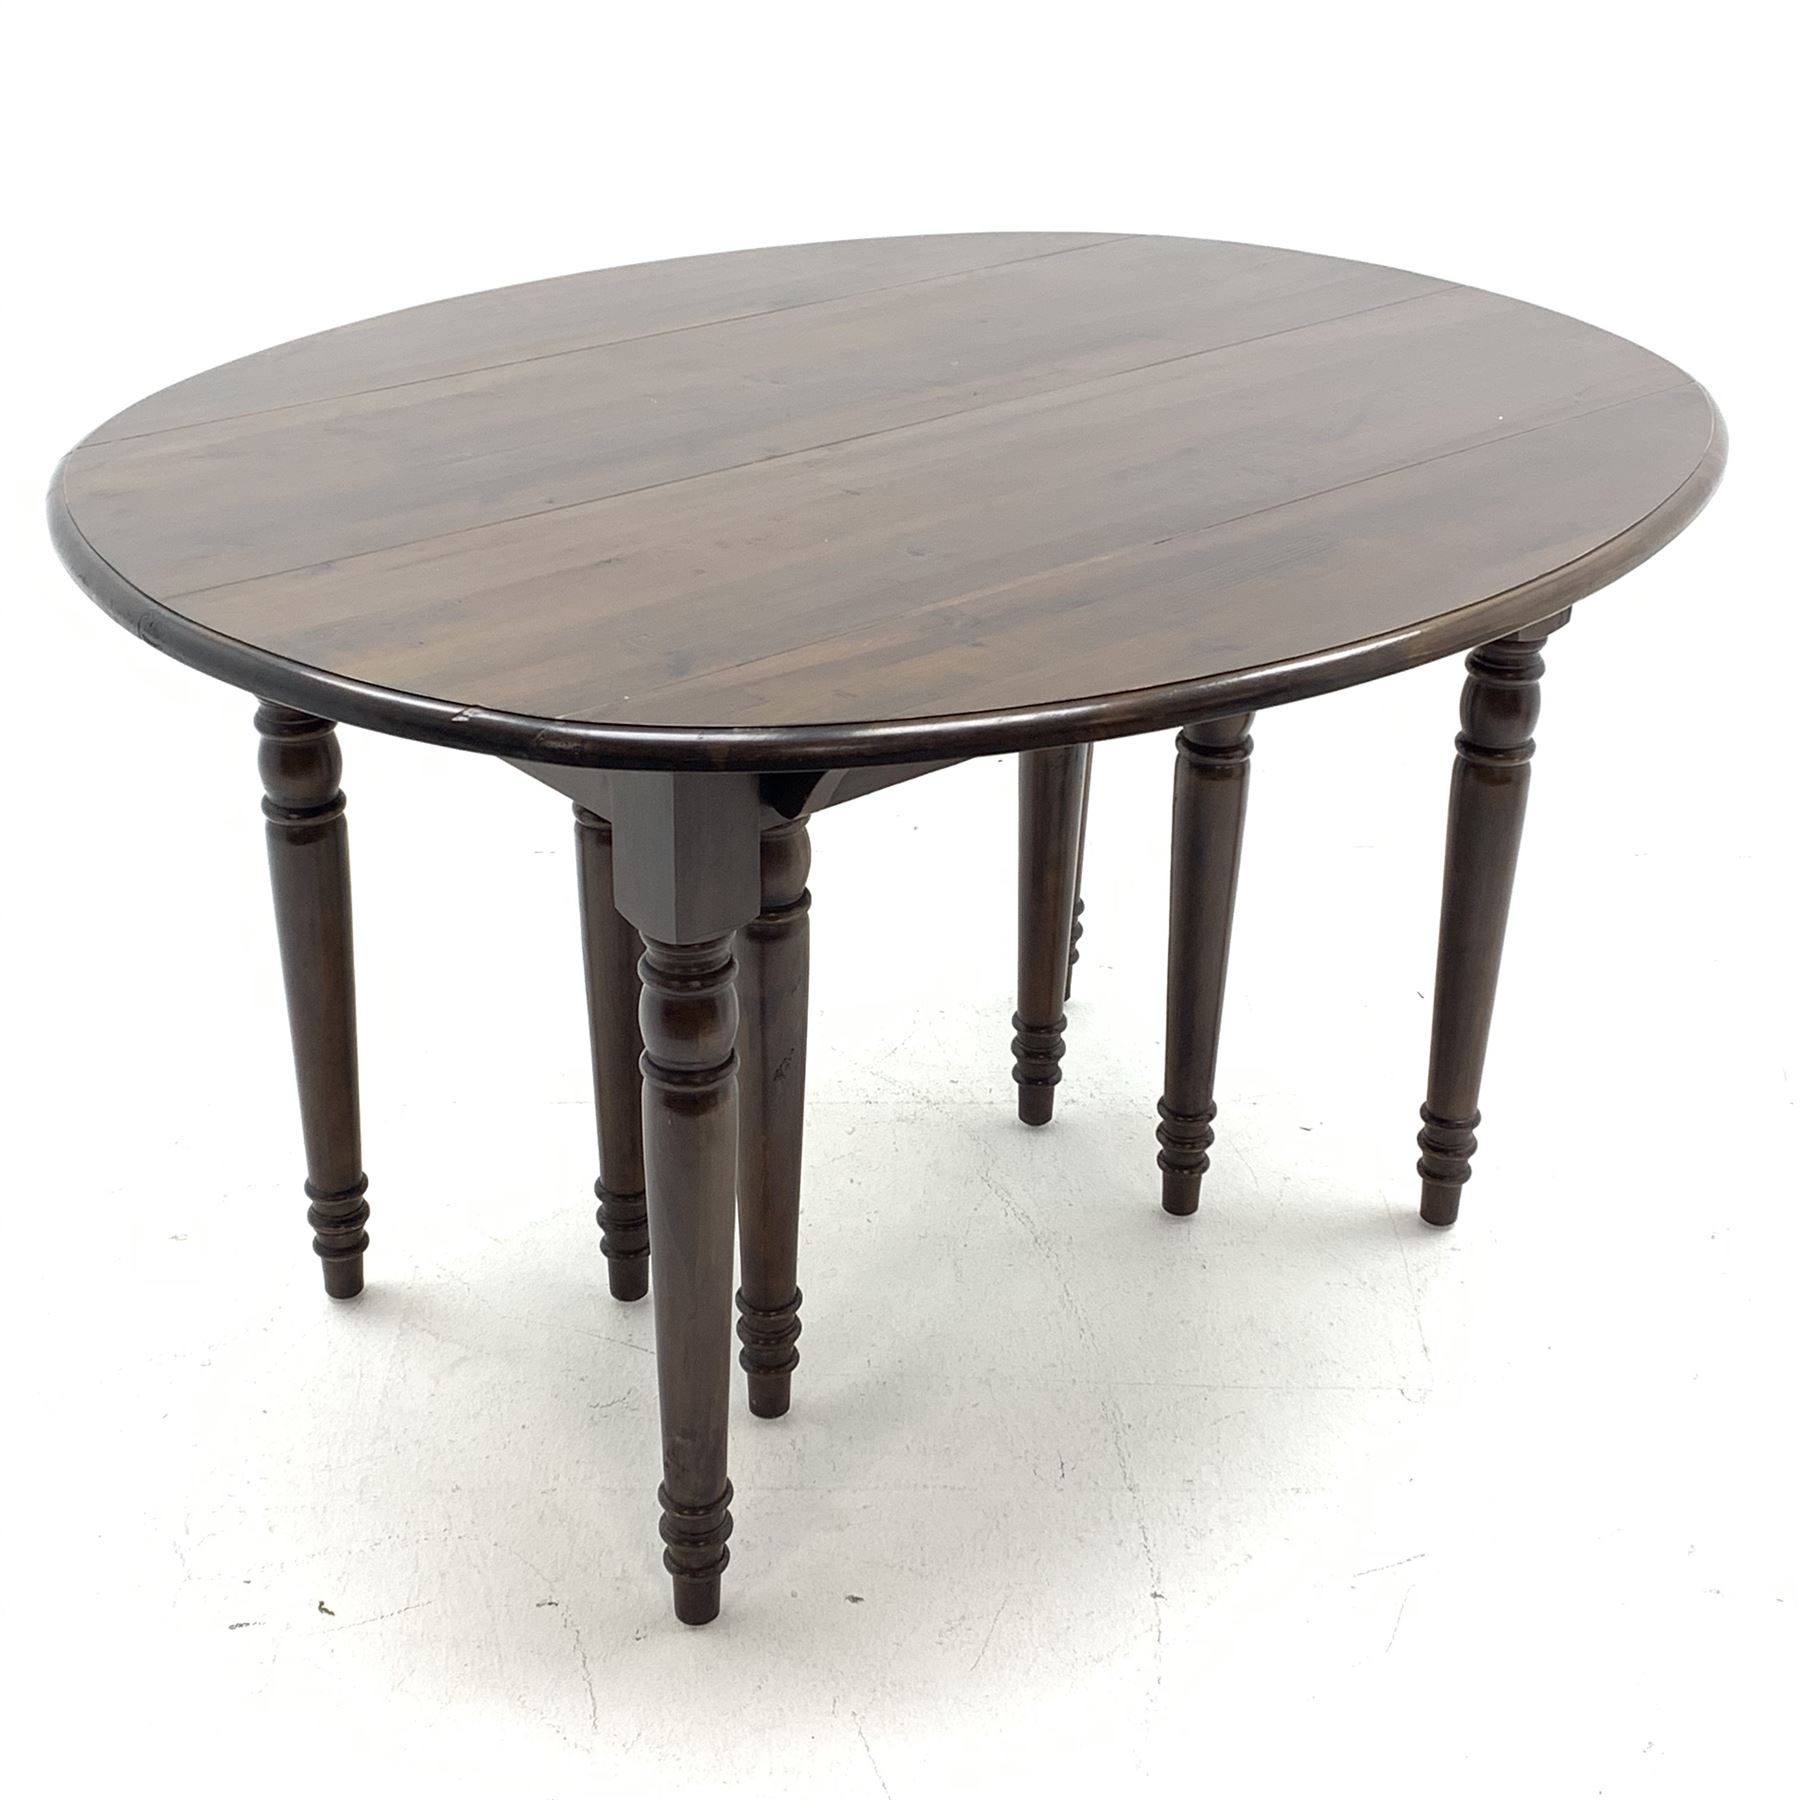 Oka Furniture - 'Petworth' French walnut extending drop leaf dining table with five additional leave - Image 3 of 4